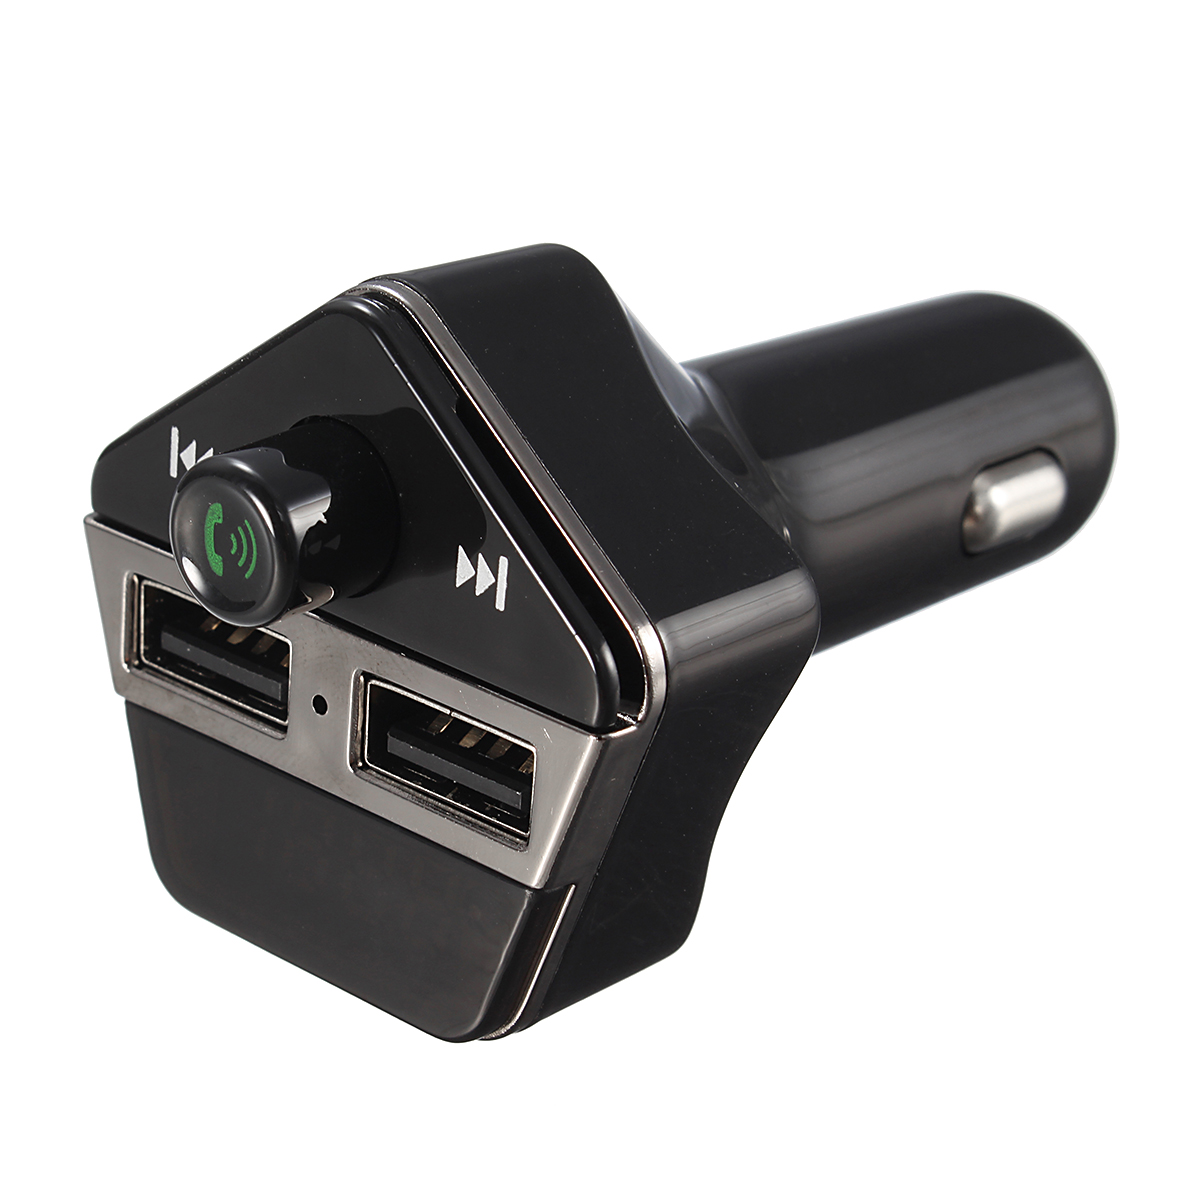 2-USB-Ports-MP3-Bluetooth-Player-Car-Kit-FM-Transmitter-Car-Charger-for-Mobile-Phone-1231969